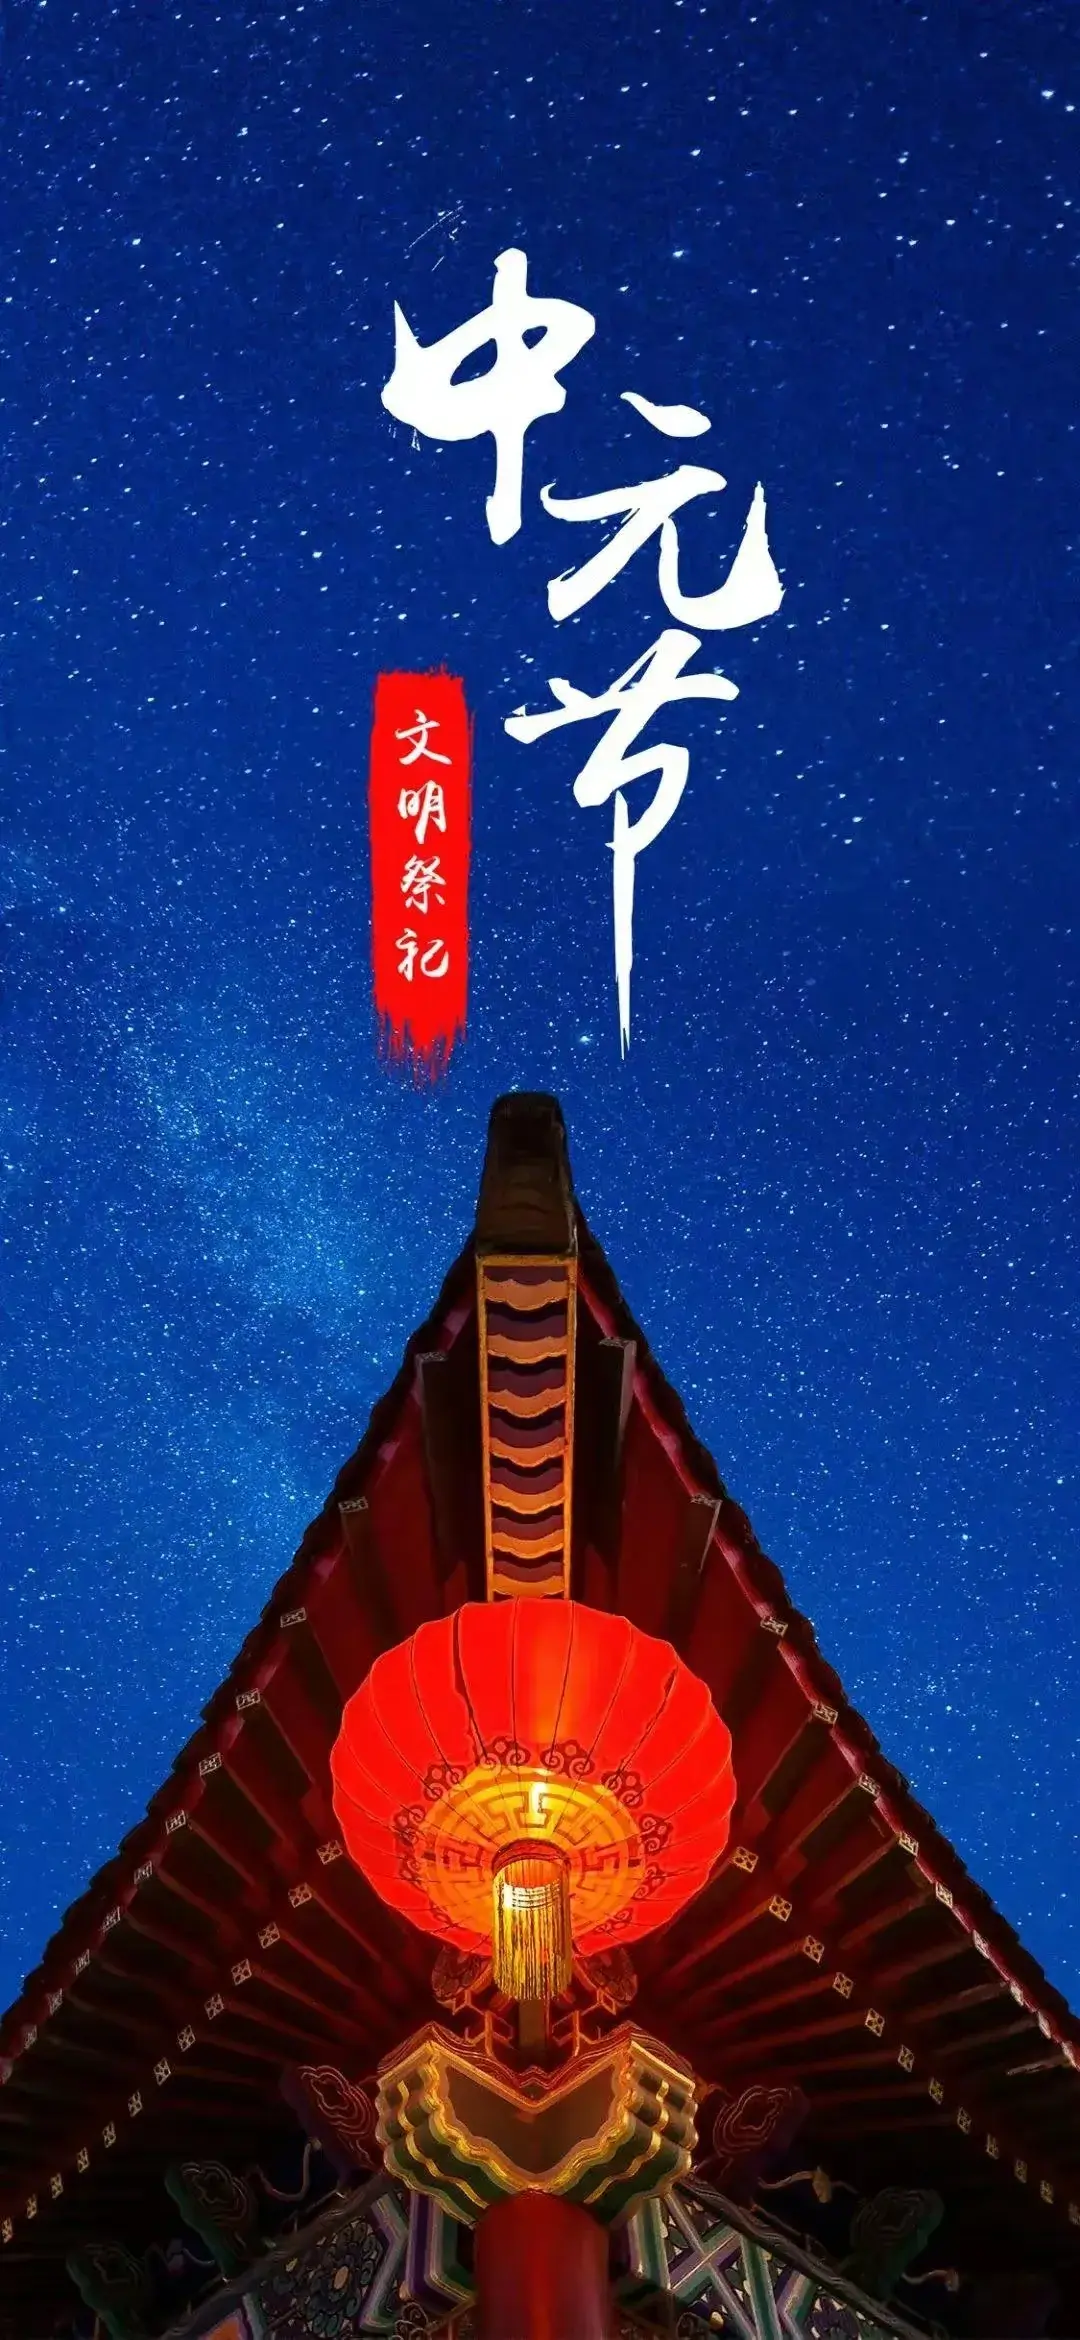 2023 Chinese Ghost Festival pictures, Chinese Ghost Festival thoughts and greetings on the 15th day of the seventh lunar month